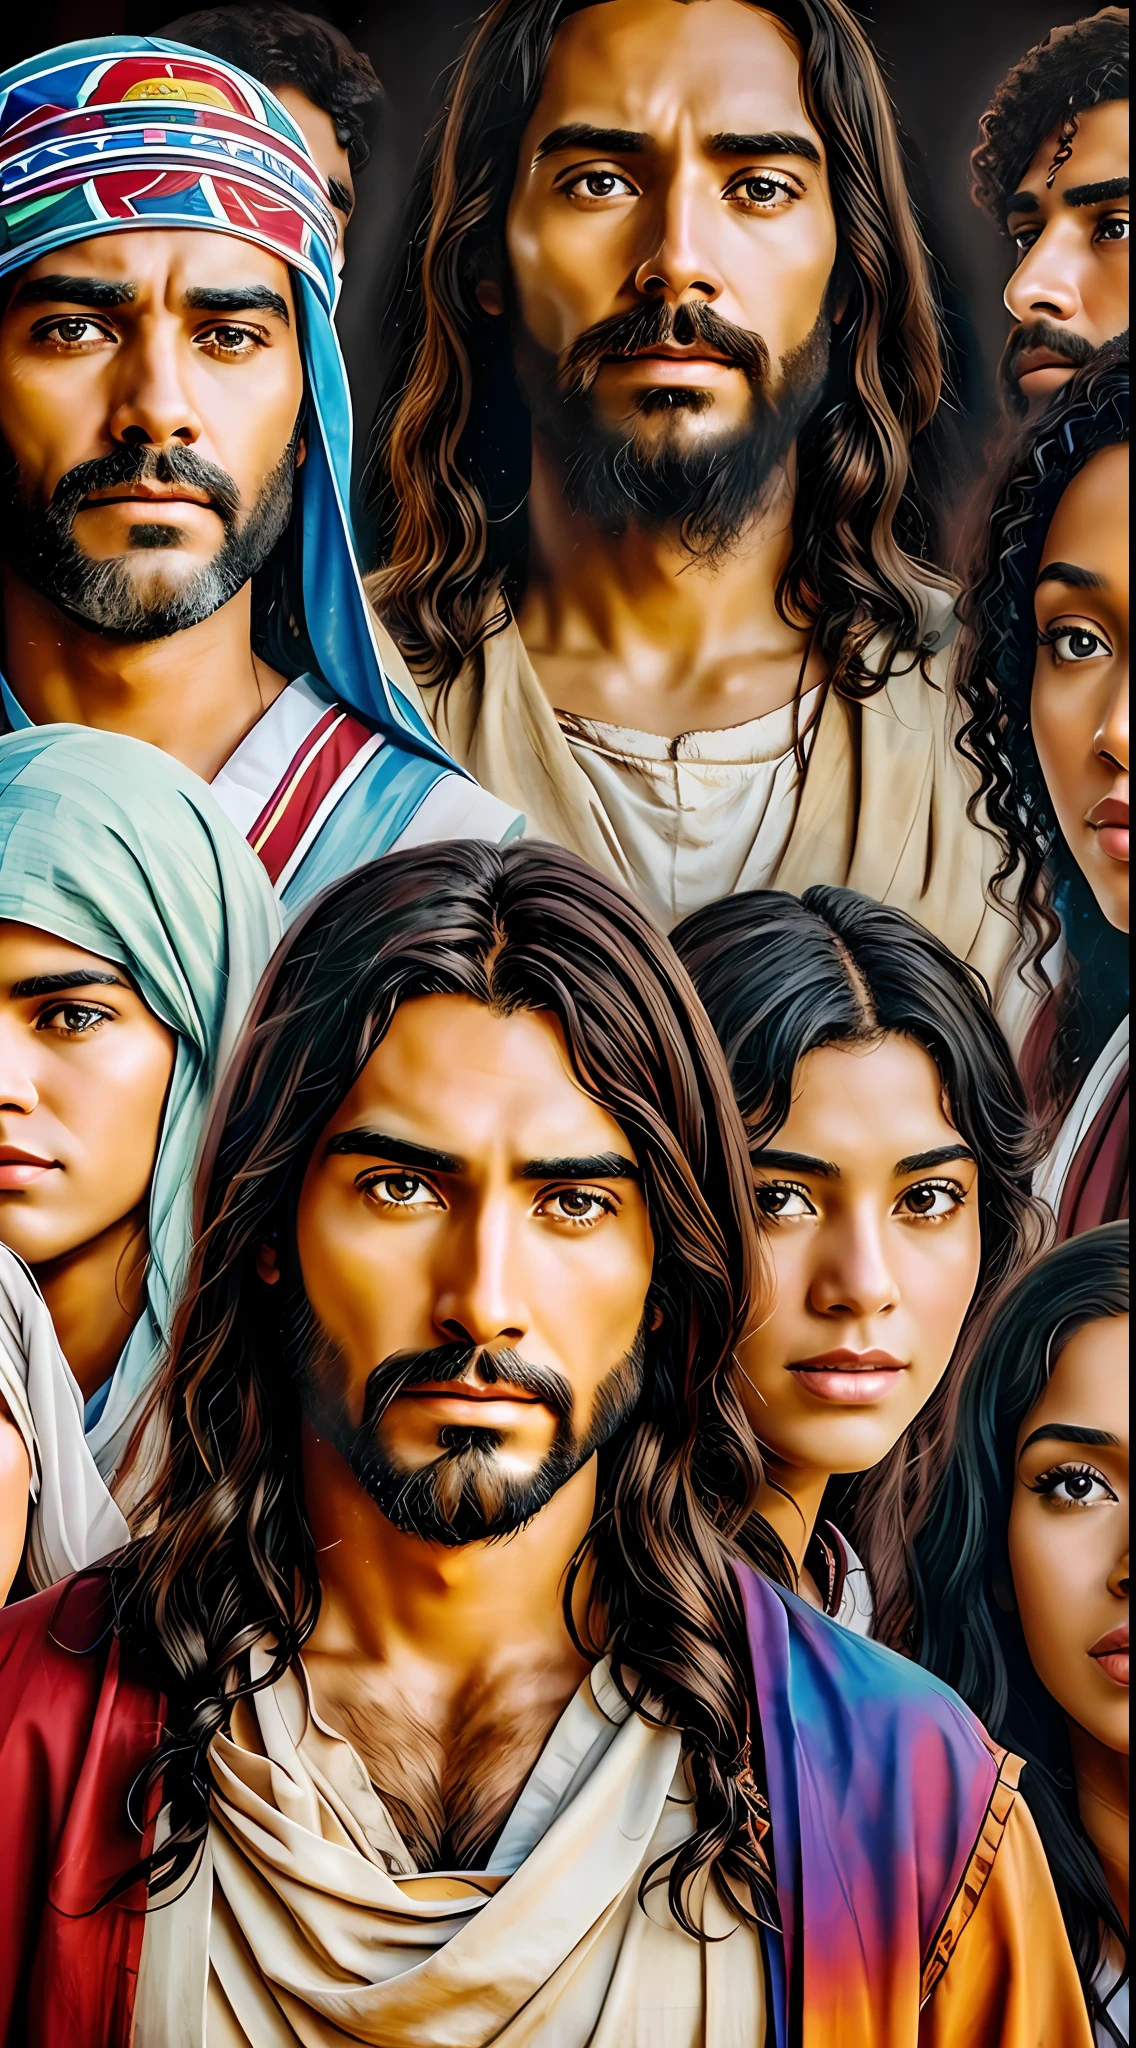 An artistic representation of Jesus Christ surrounded by people from different cultures and backgrounds.